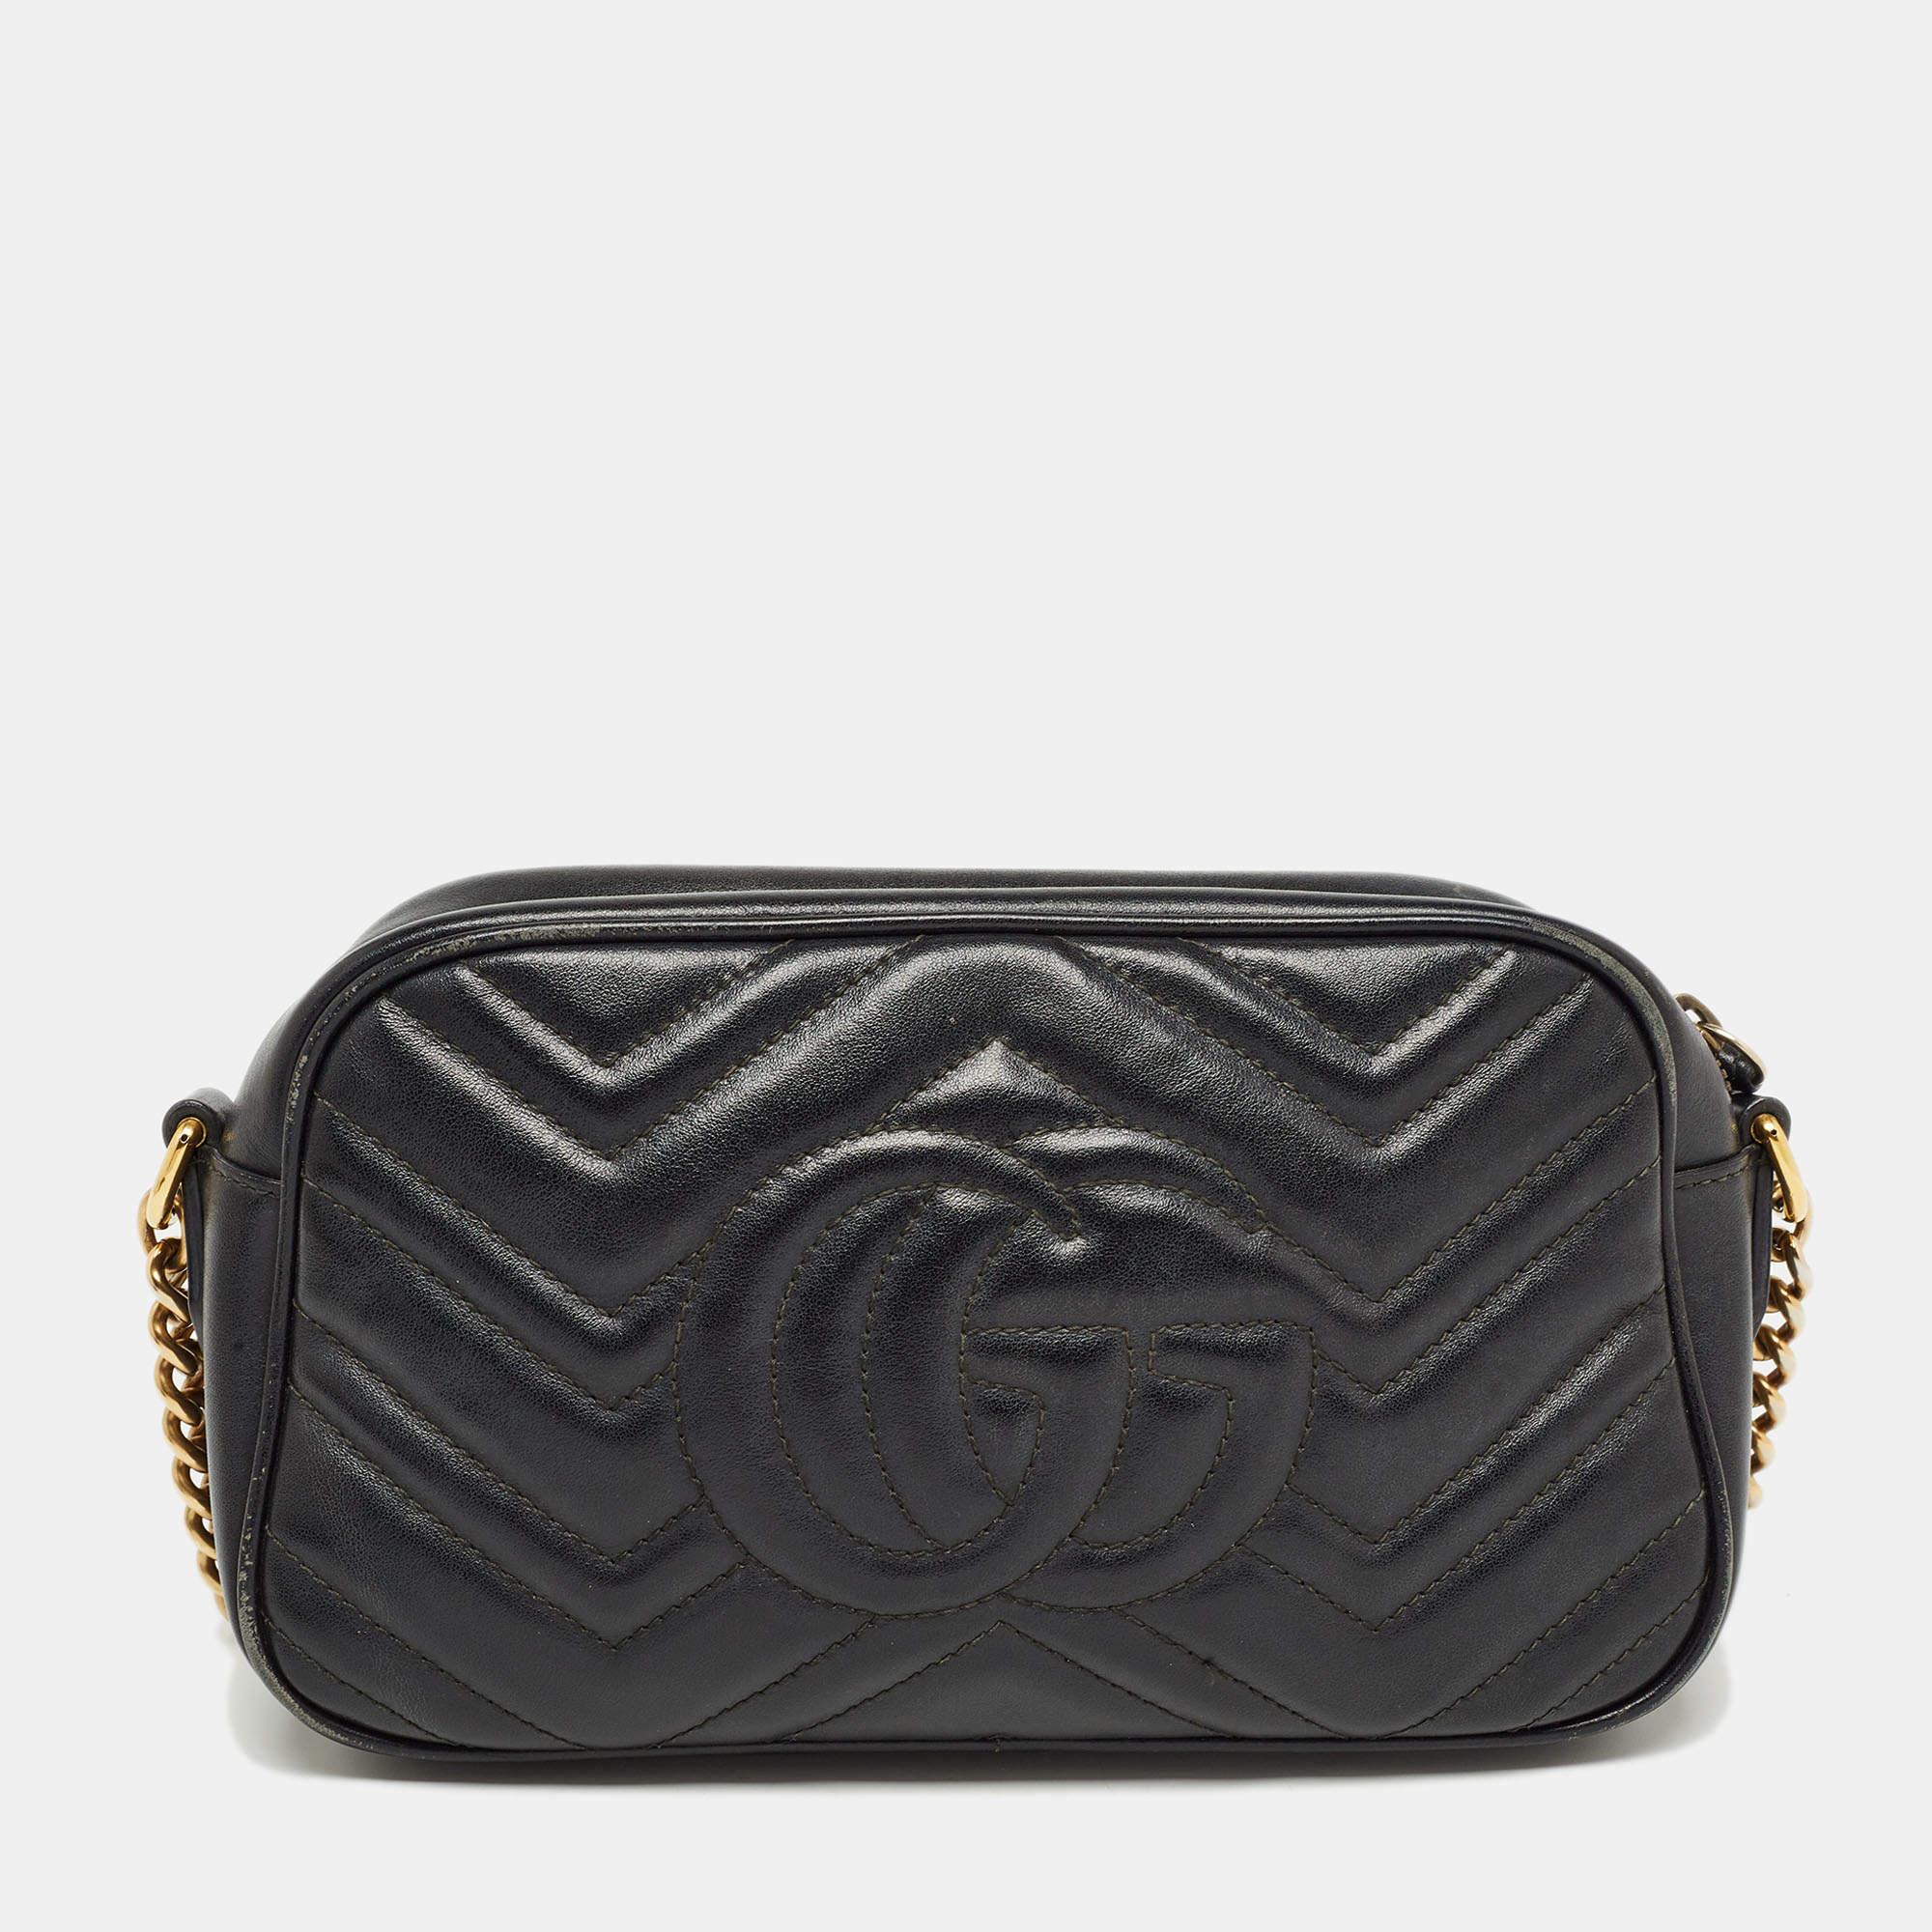 The Gucci bag exudes timeless elegance. Crafted from supple black leather, its quilted matelassé pattern is adorned with the iconic GG logo. The shoulder bag seamlessly combines luxury and sophistication, making it a must-have accessory for the